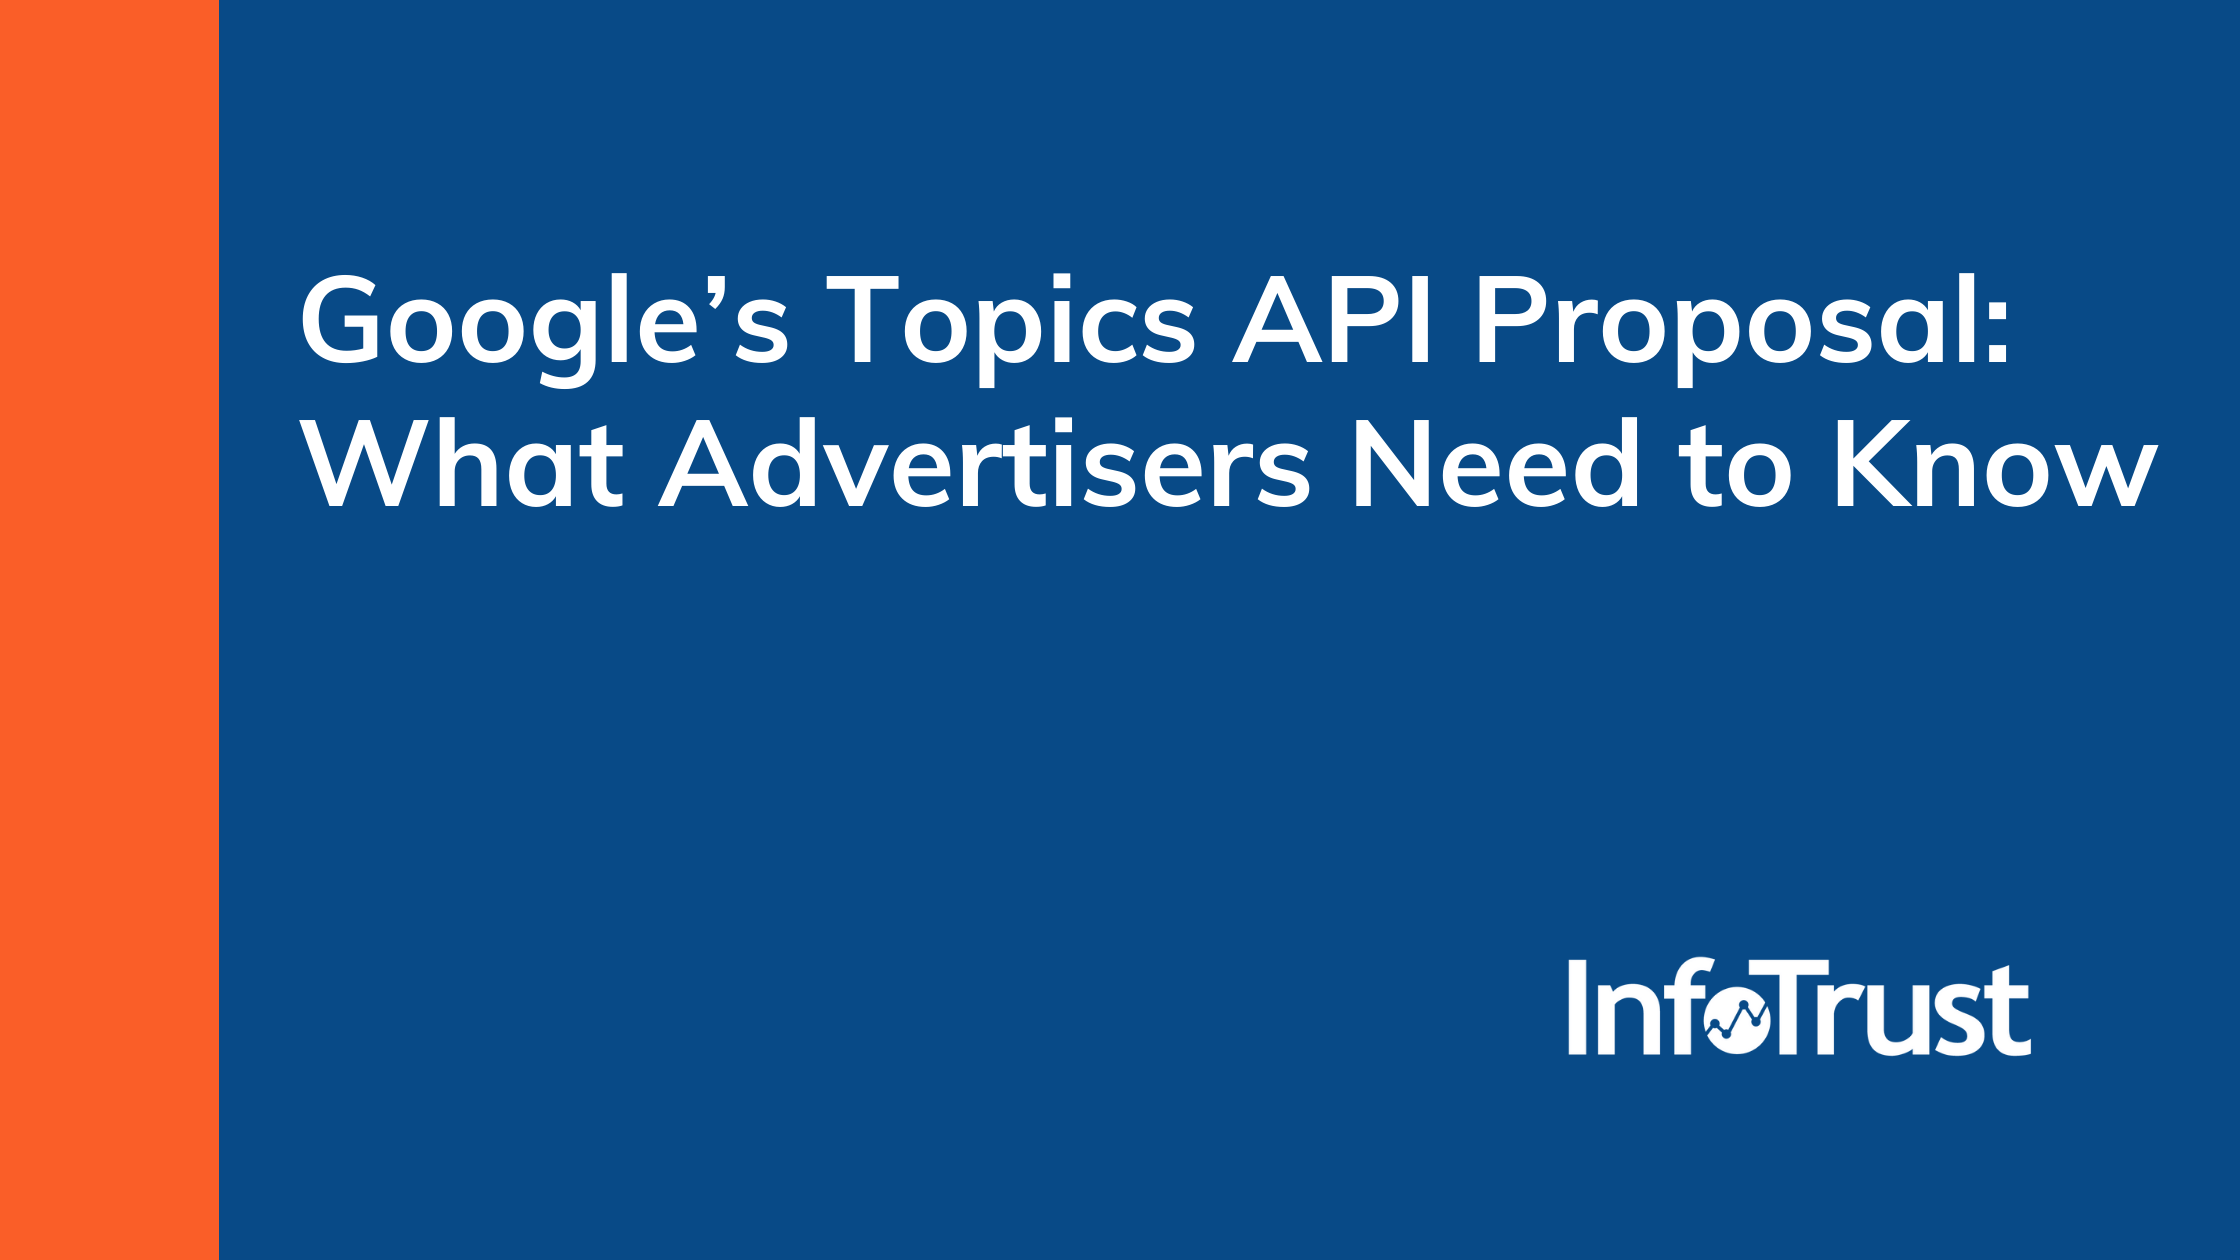 Google’s Topics API Proposal: What Advertisers Need to Know